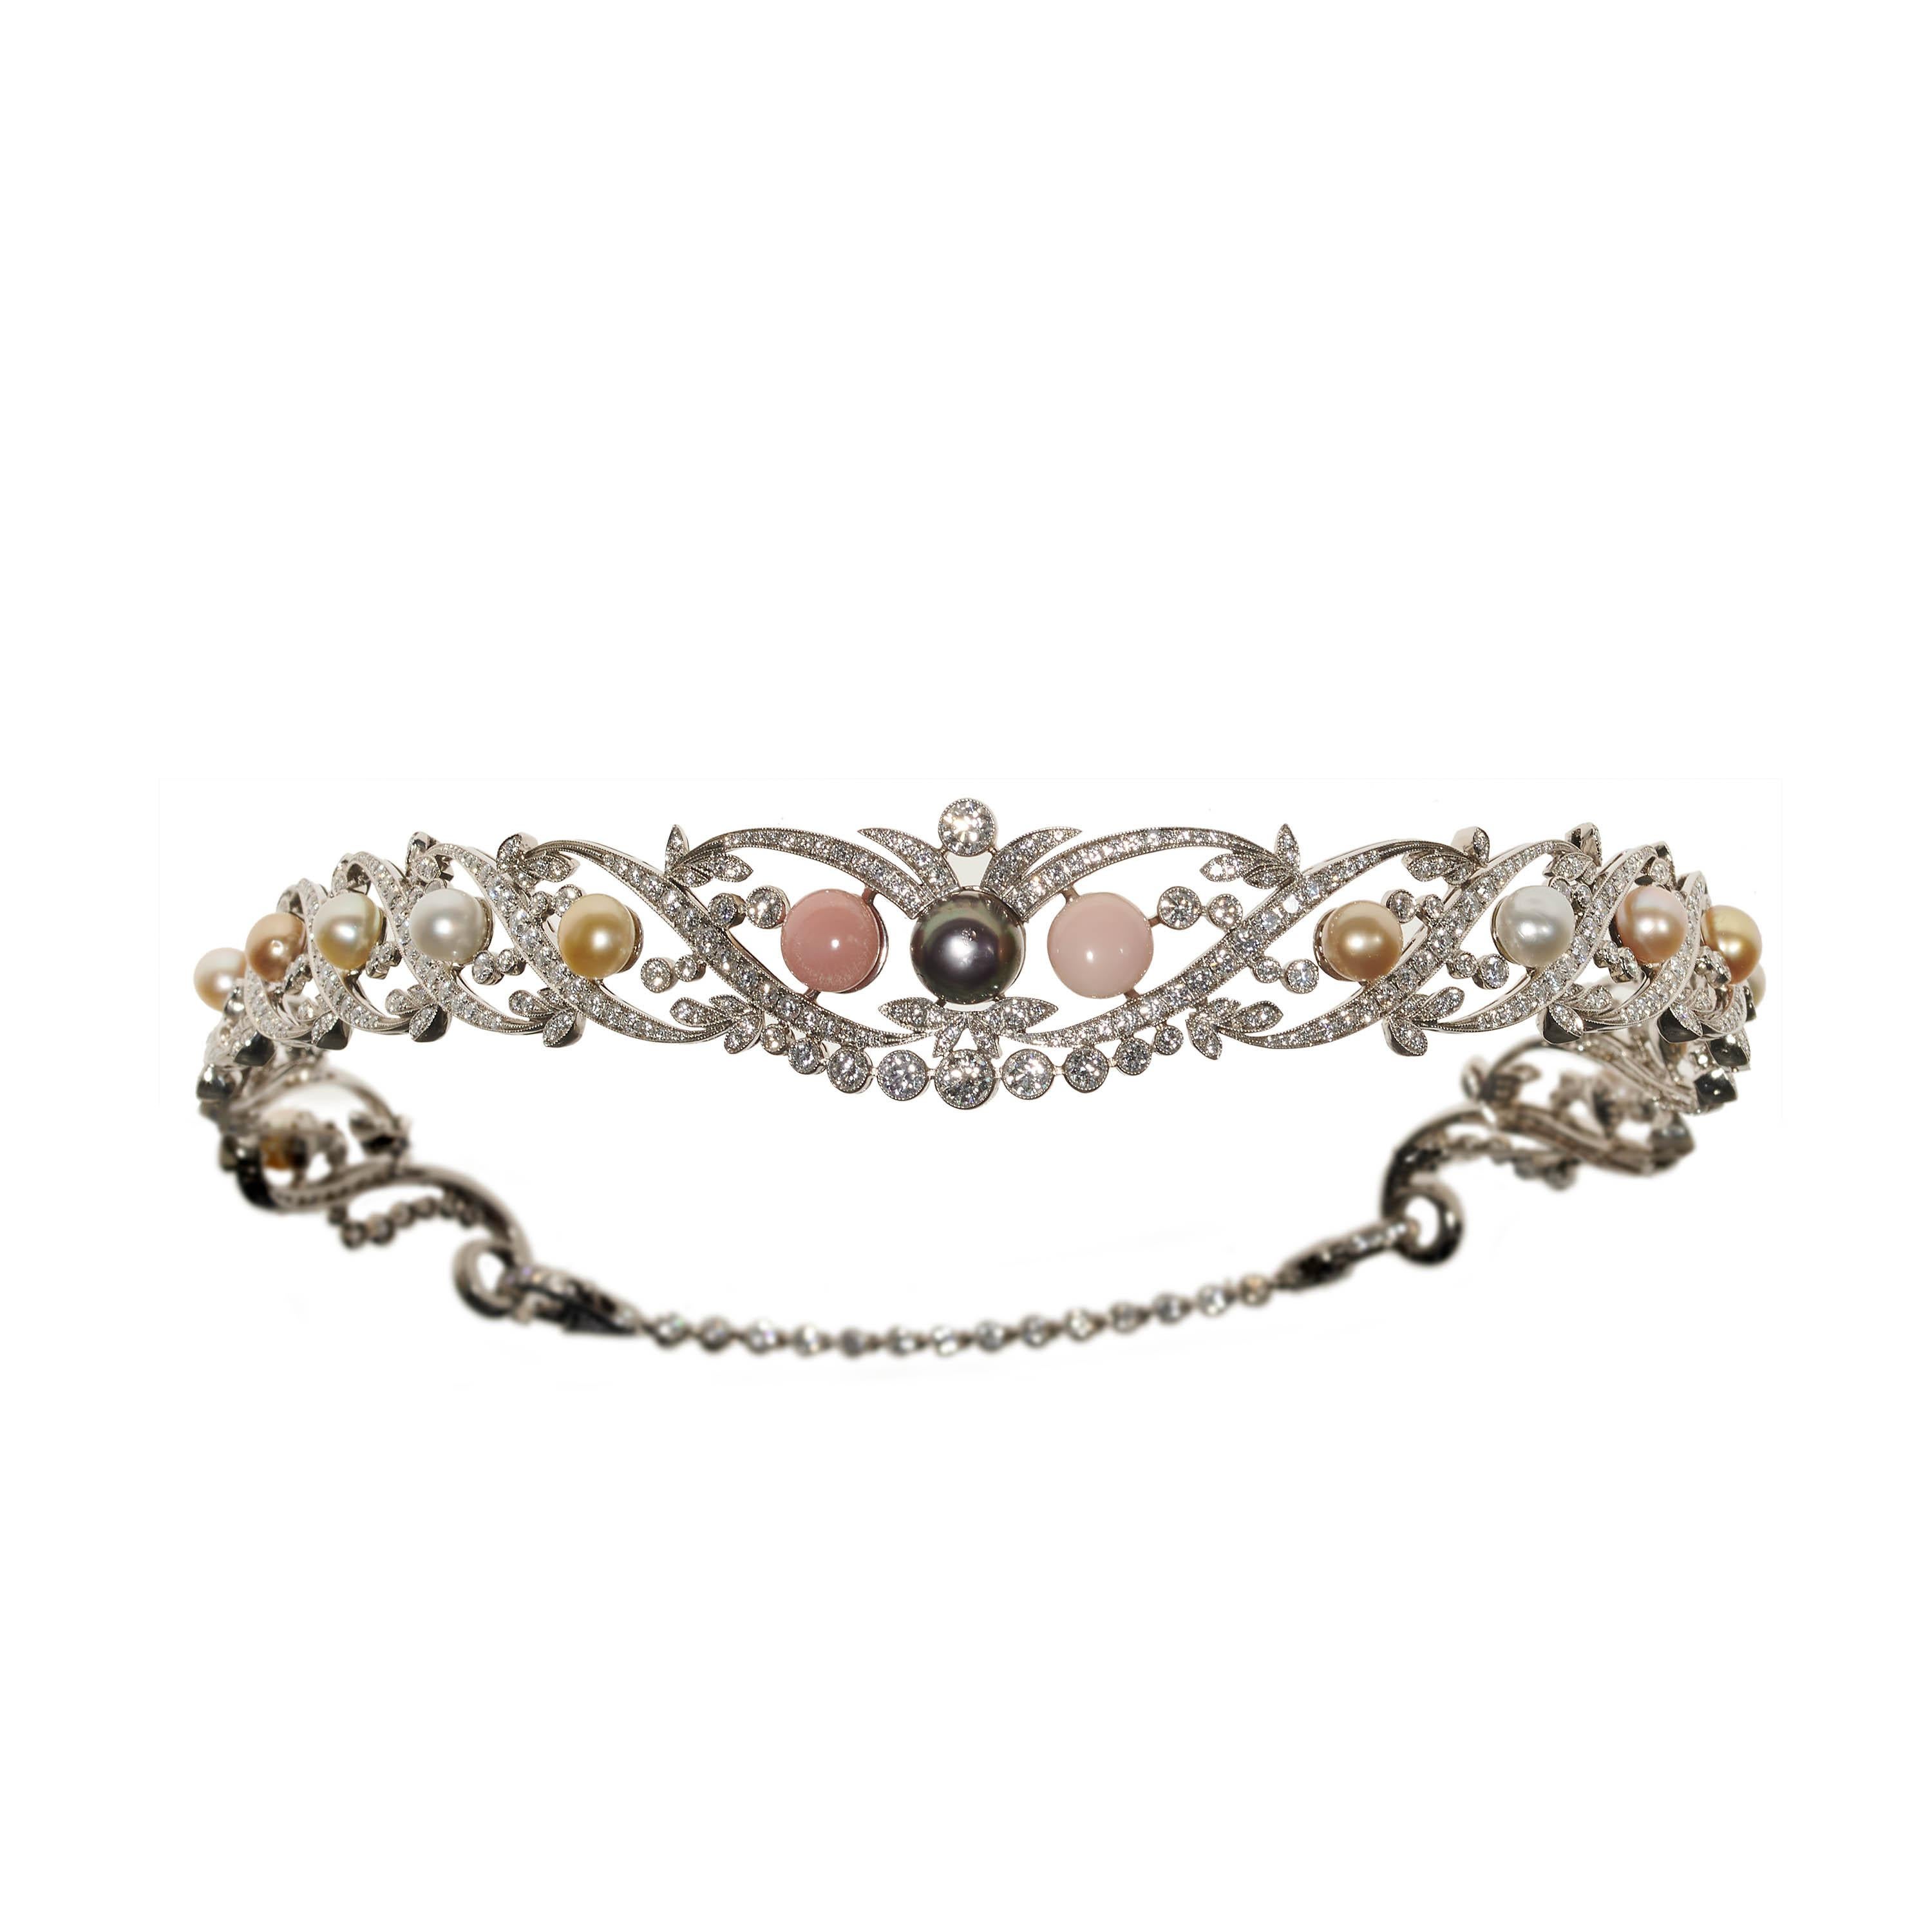 A modern pearl and diamond tiara, the openwork design featuring cultured pearls of varying colours, the black pearl weighing an estimated 5.42 carats, the conch pearls weighing an estimated total of 7.24 carats, and the remaining pearls weighing an